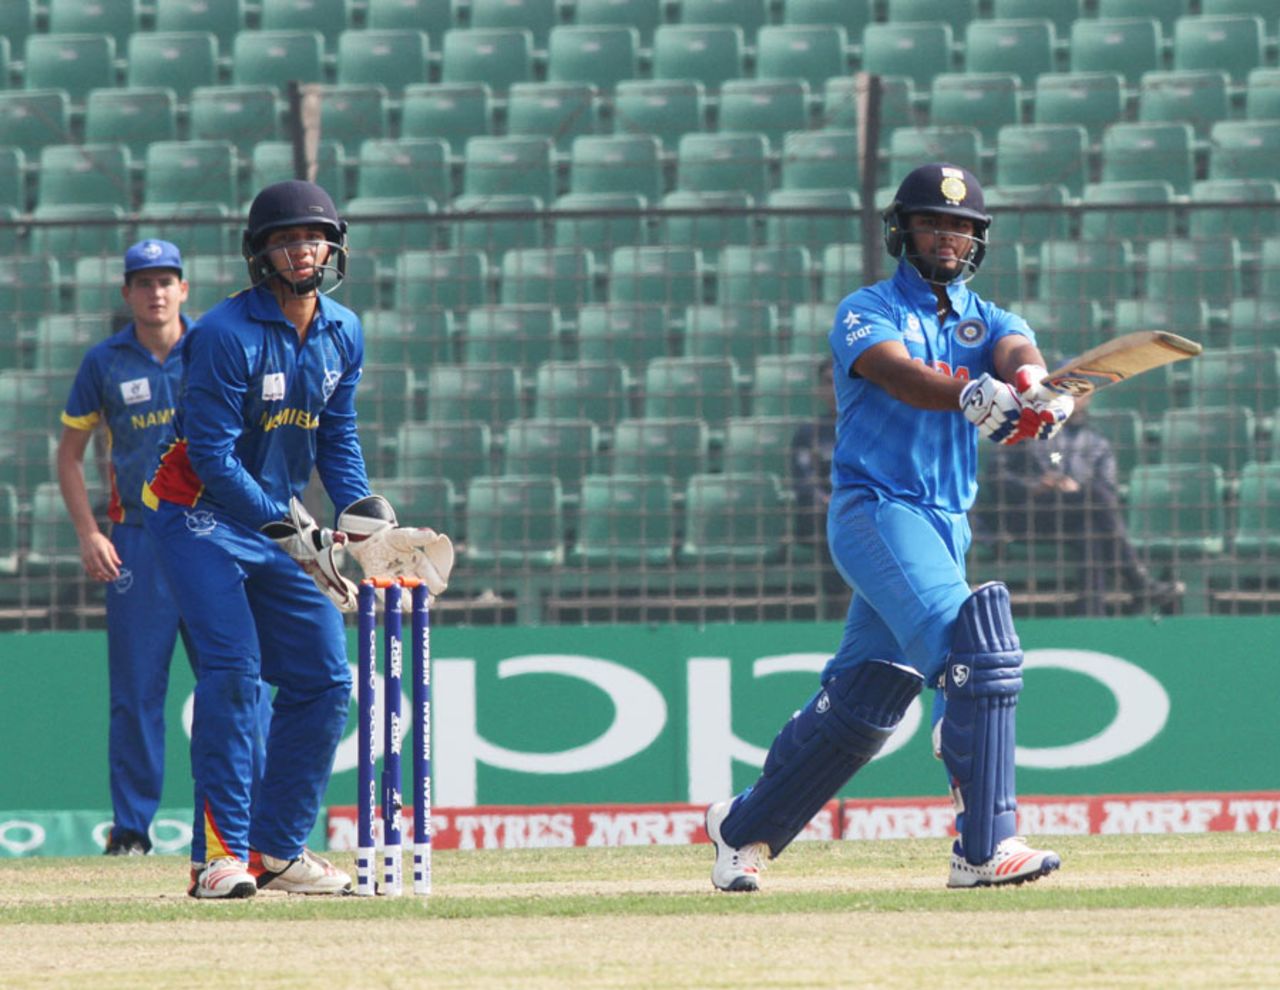 Rishabh Pant pulls during his brisk ton, India Under-19s v Namibia Under-19s, Quarter-final, Under-19 World Cup, Fatullah, February 6, 2016